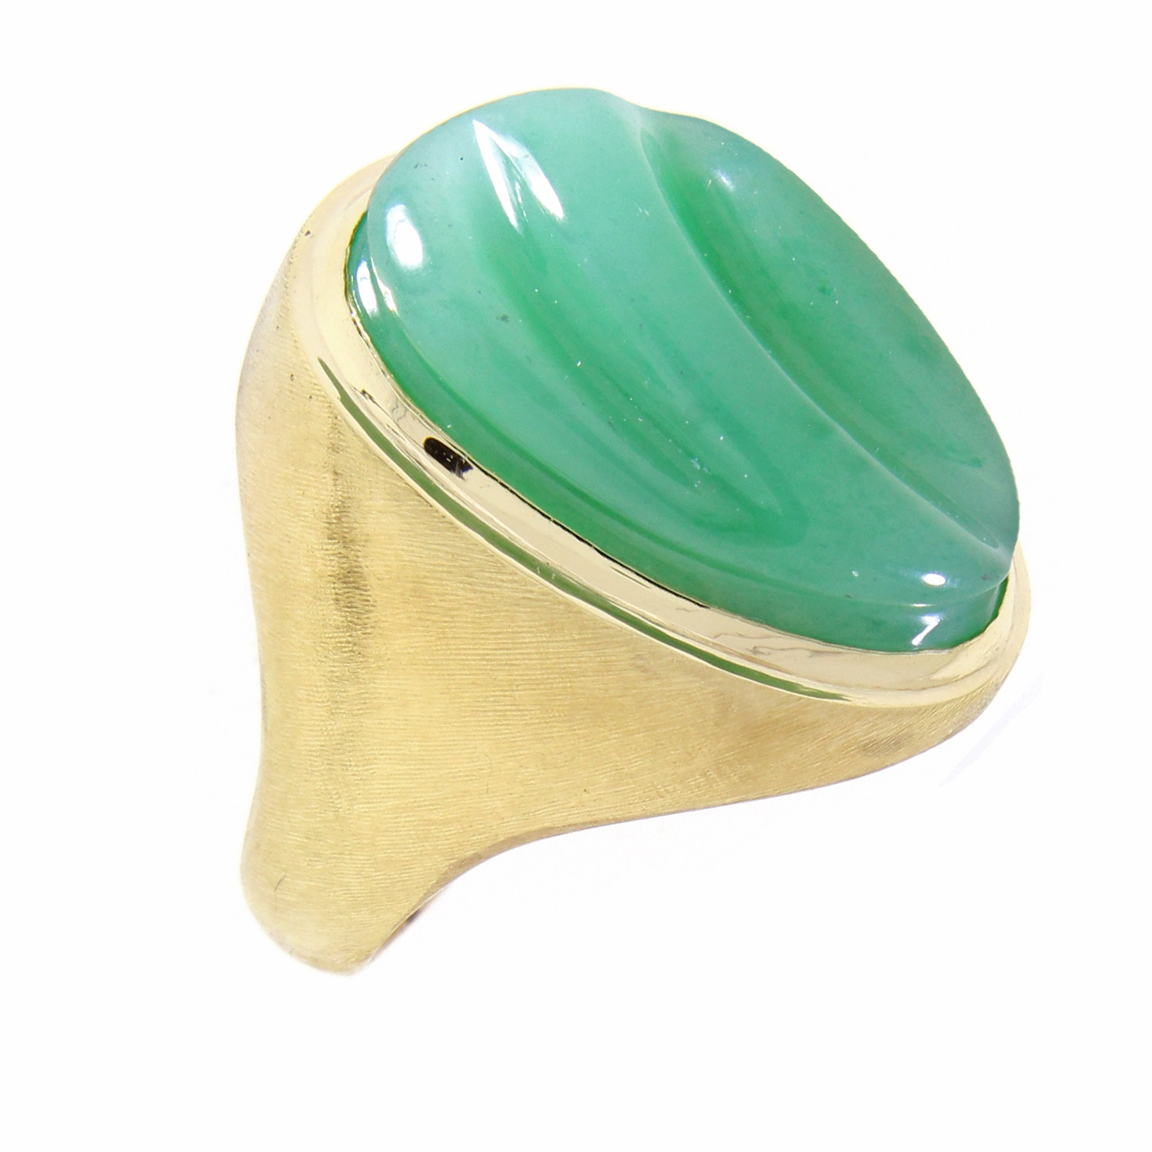 Burl-Marx Forma Livre Sculpted Green Chrysoprase Ring at pampillonia